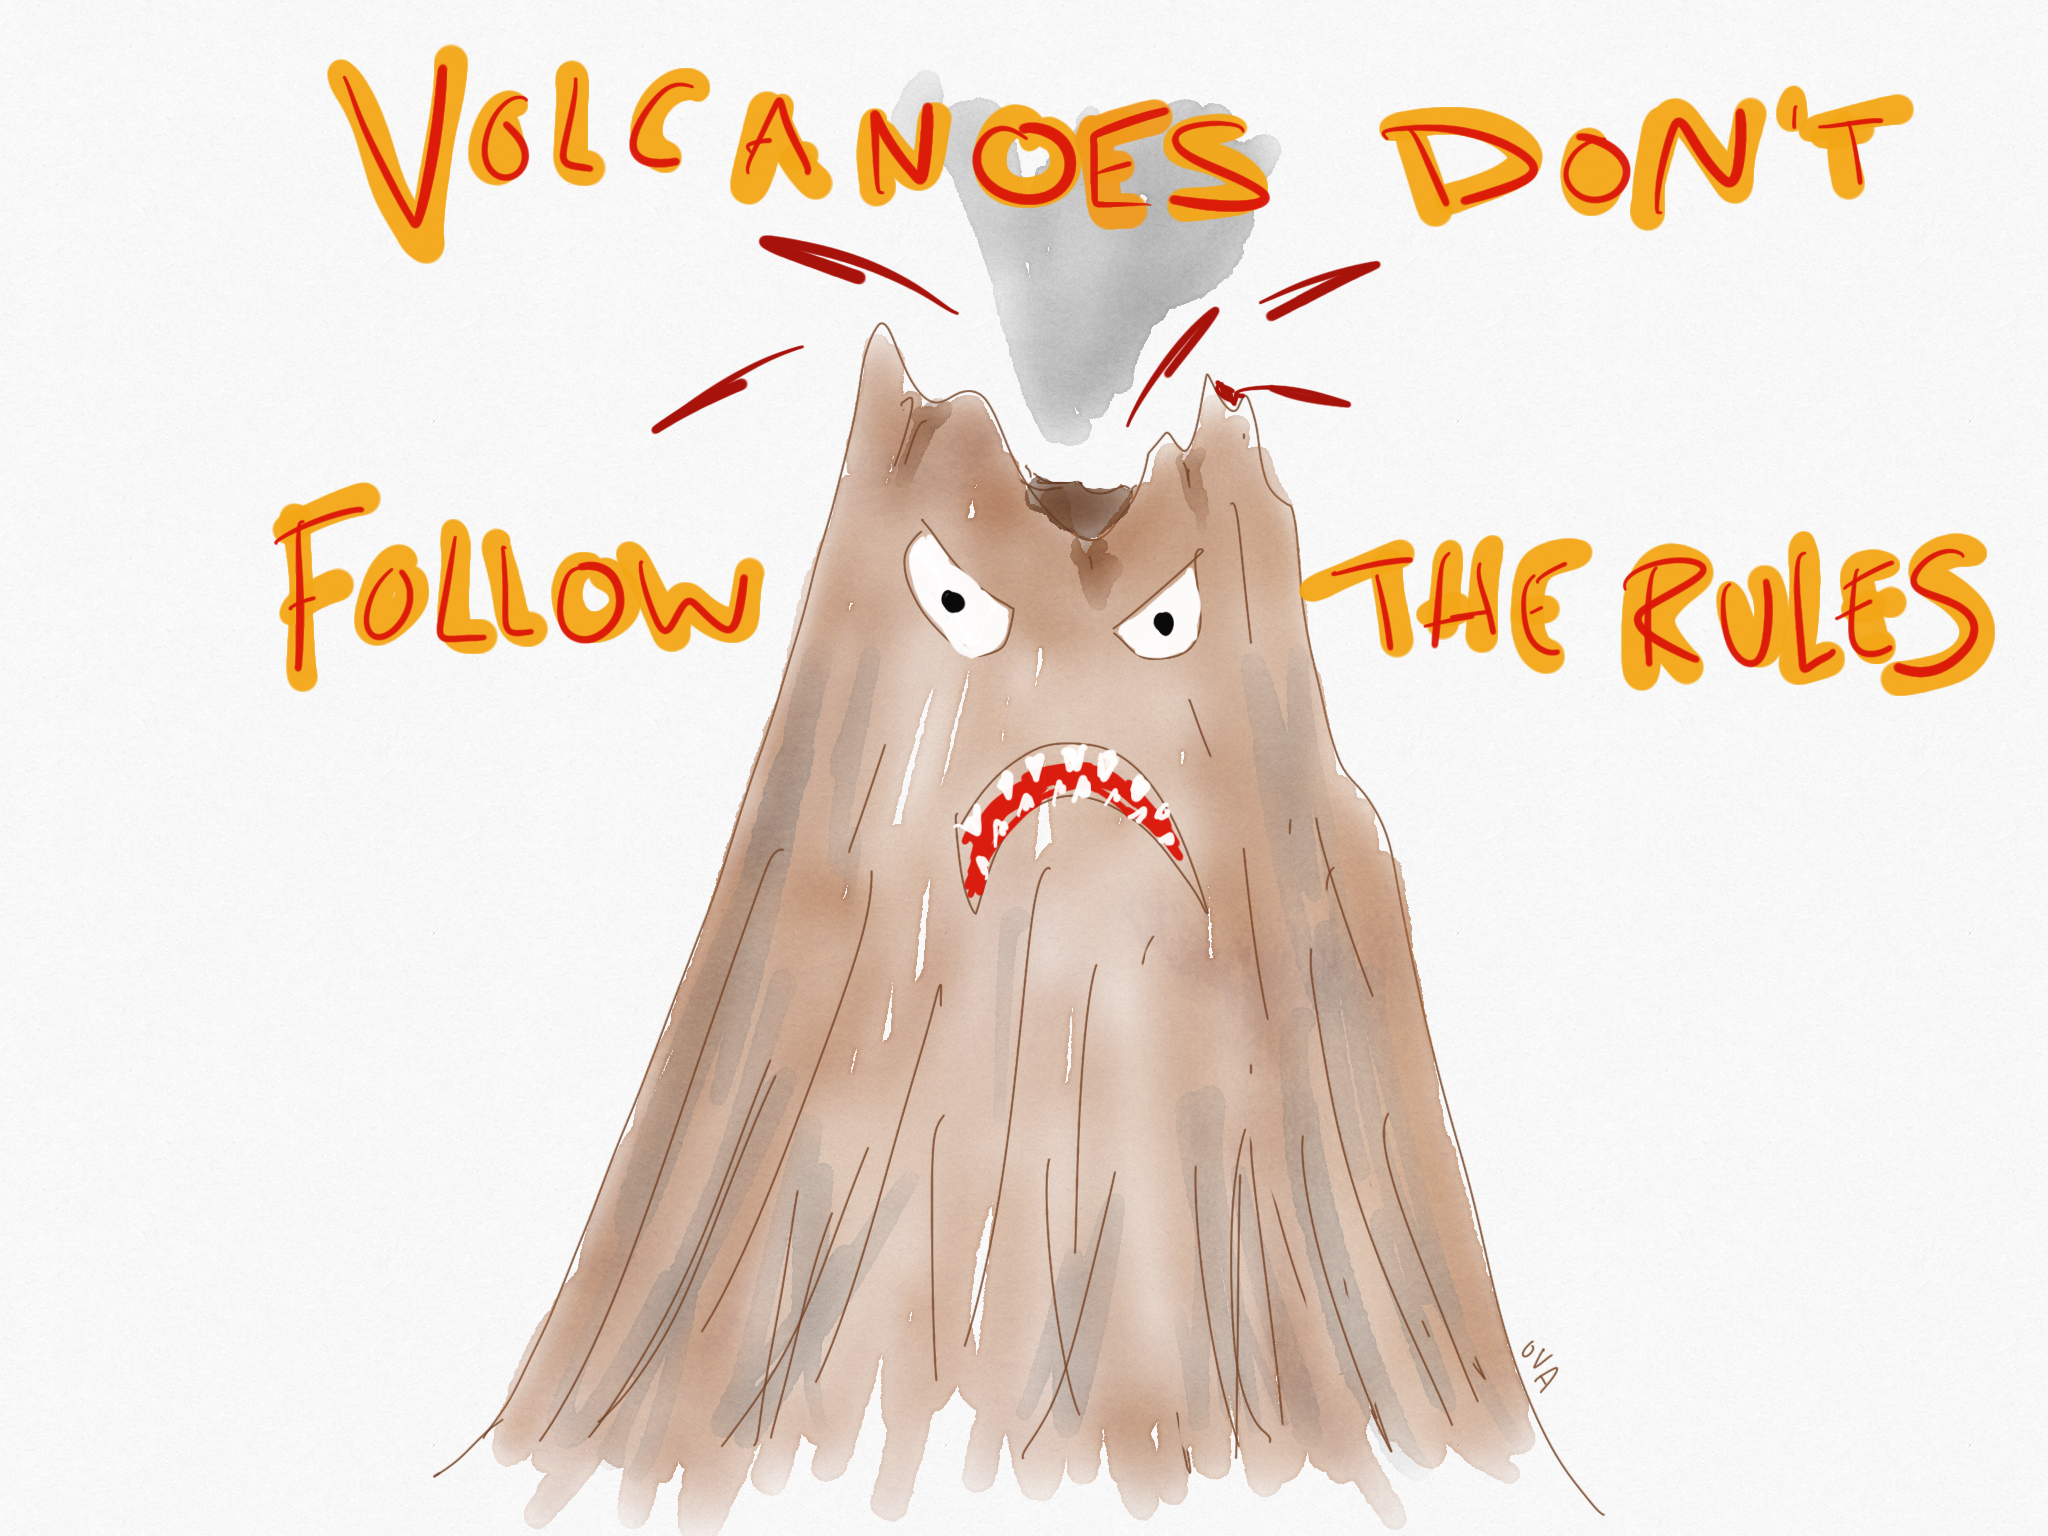 Cartoon of angry volcano with caption "Volcanoes Don't Follow The Rules."